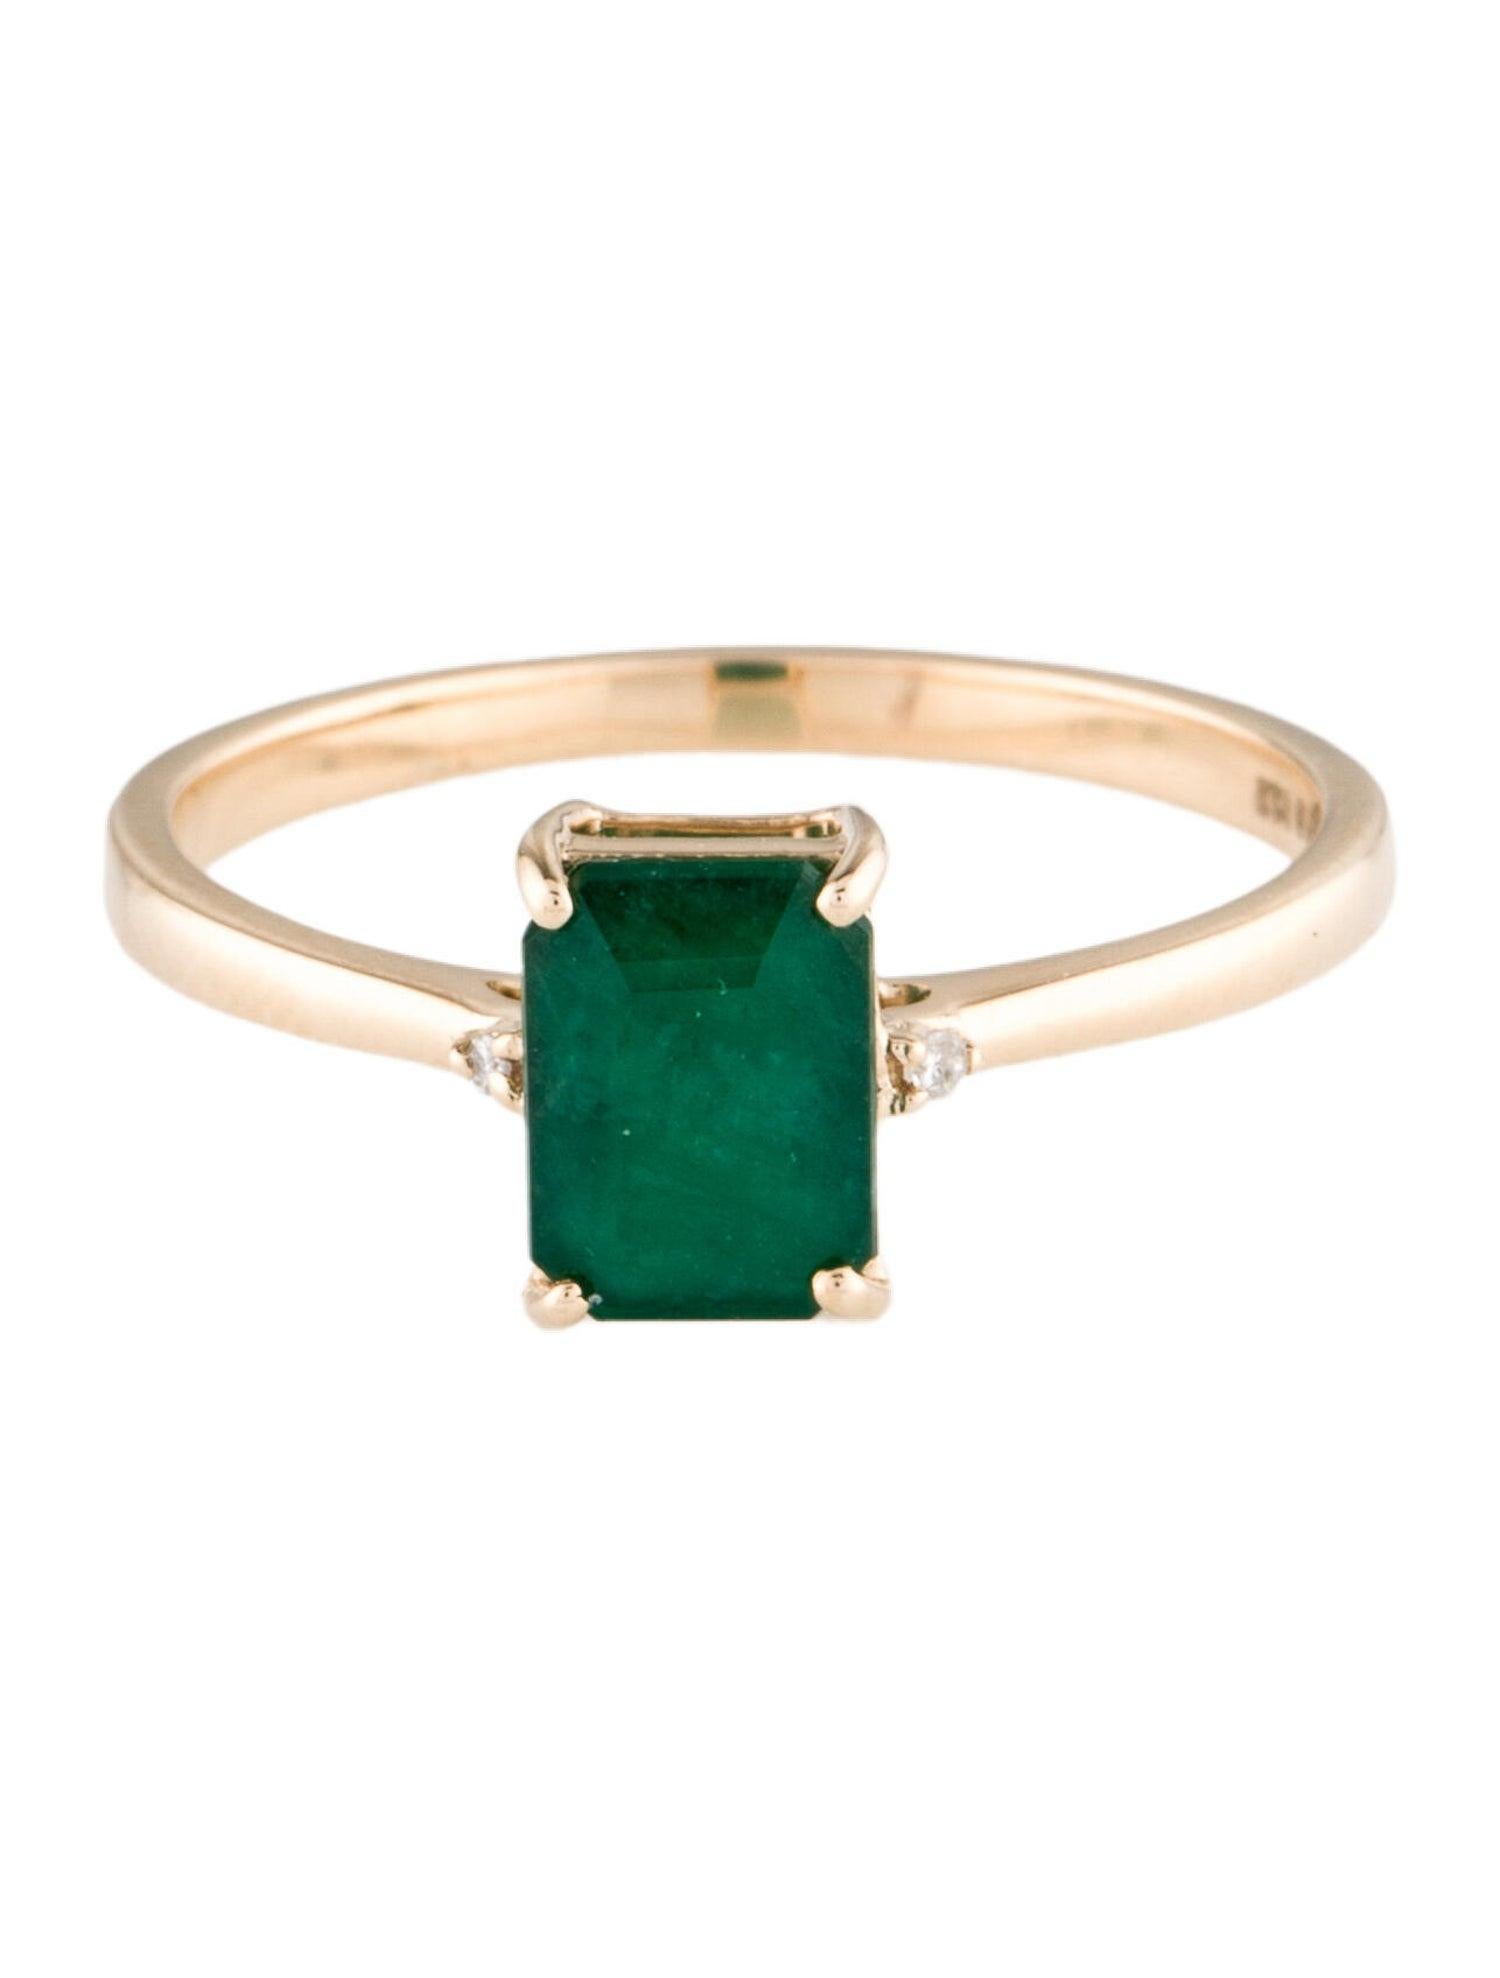 14K Yellow Gold Emerald Cut Emerald & Diamond Cocktail Ring Size 7 In New Condition For Sale In Holtsville, NY